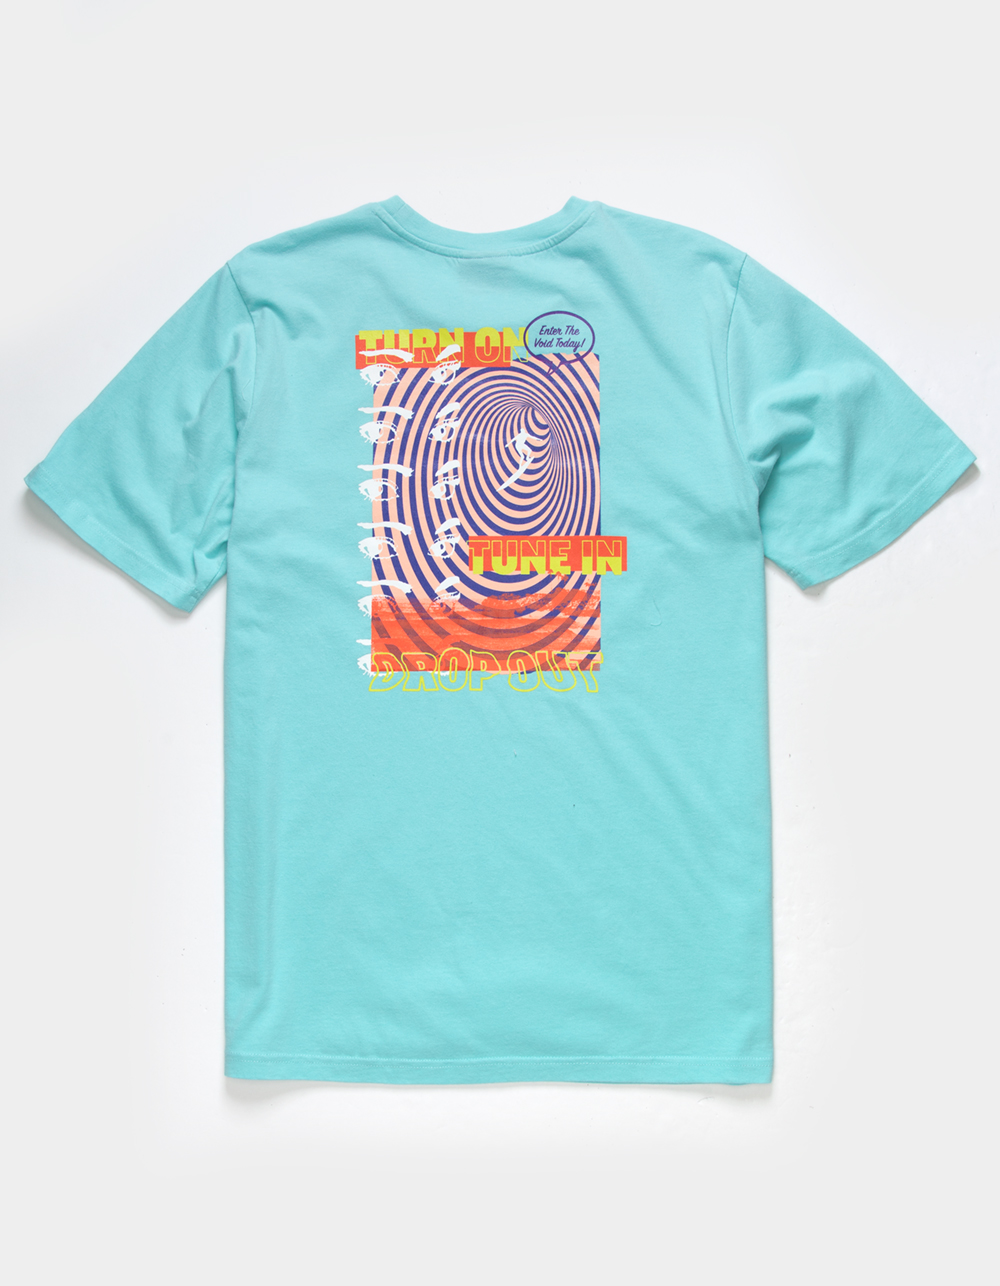 CONEY ISLAND PICNIC Party Wave Mens Tee - TEAL BLUE | Tillys